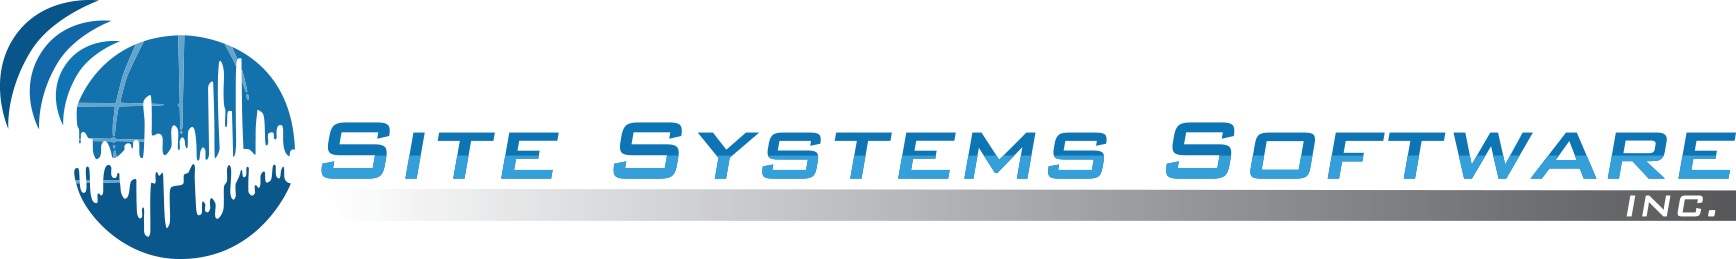 Site Systems Software Inc.